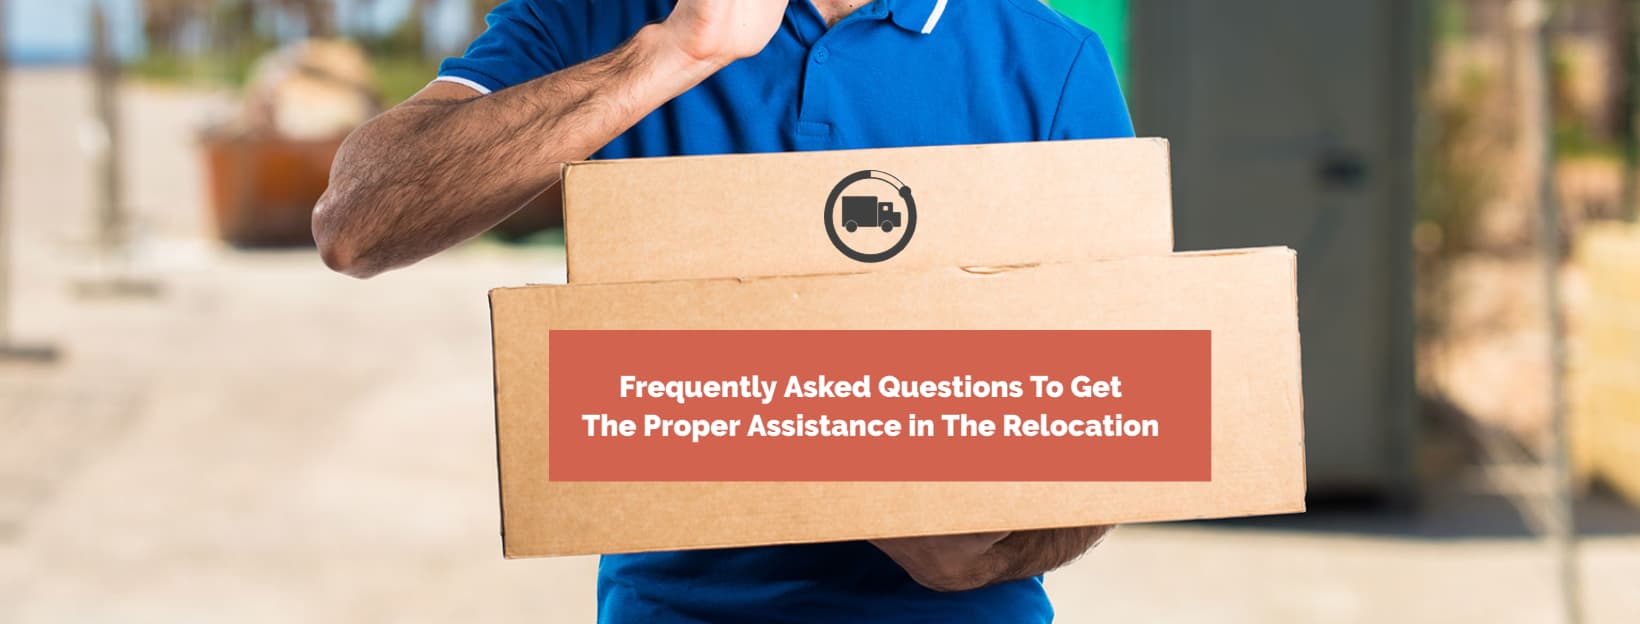 Frequently Asked Questions To Get The Proper Assistance in The Relocation